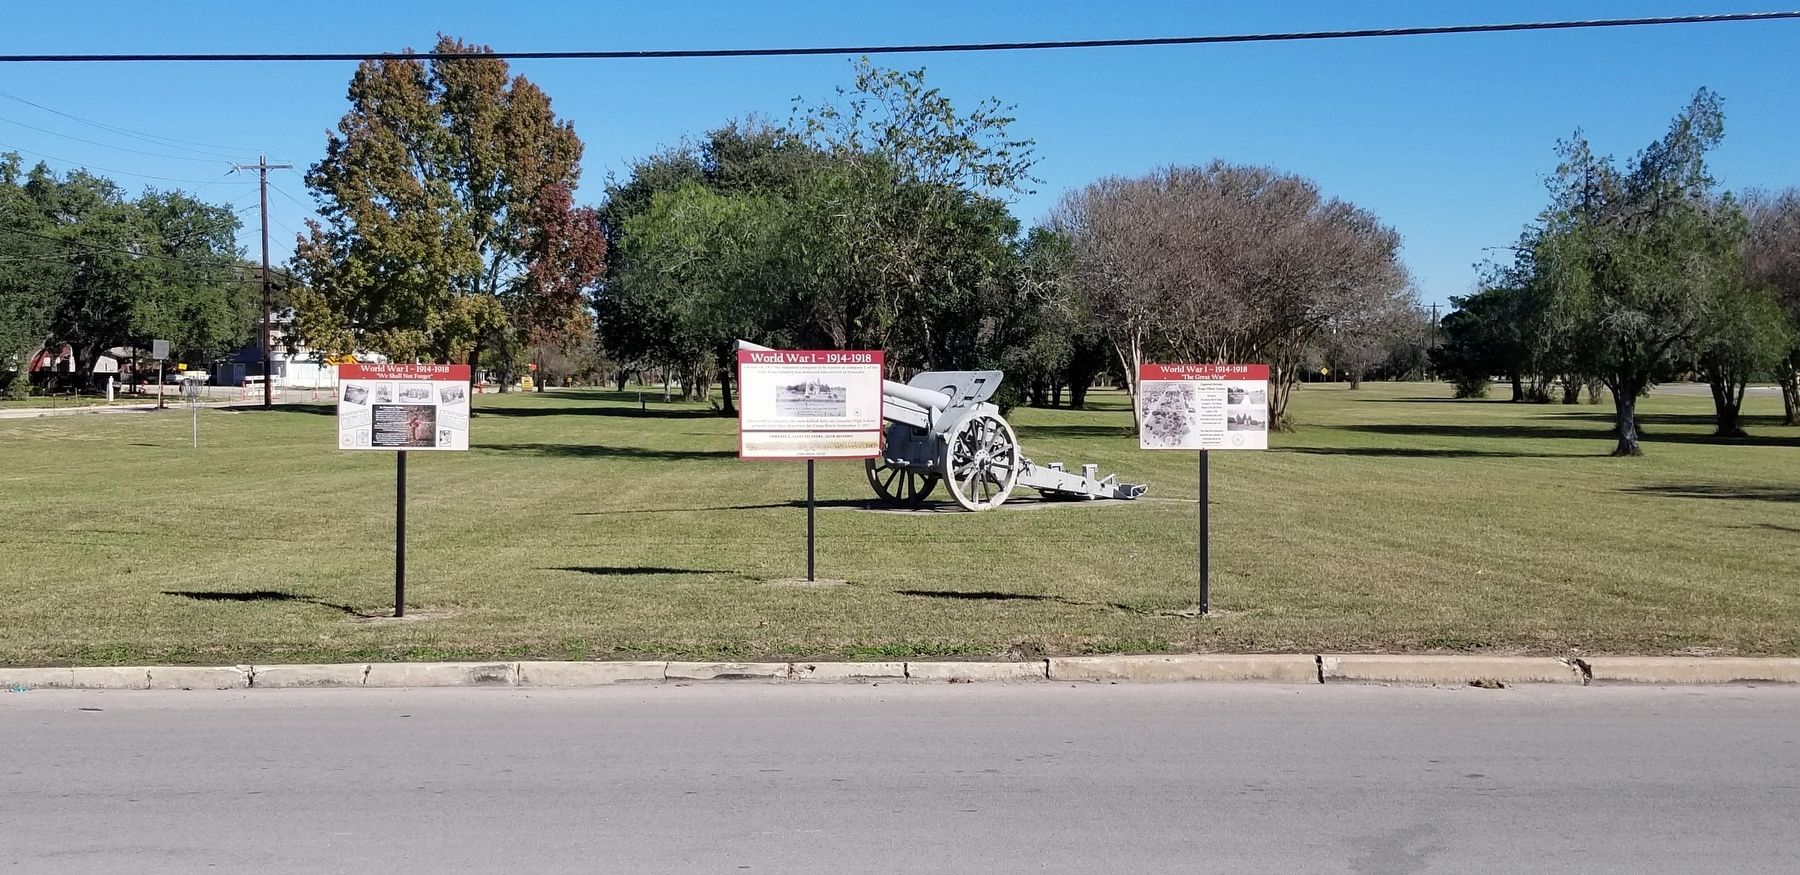 The Company L, First Texas Infantry Marker is the marker in the middle of the three markers image. Click for full size.